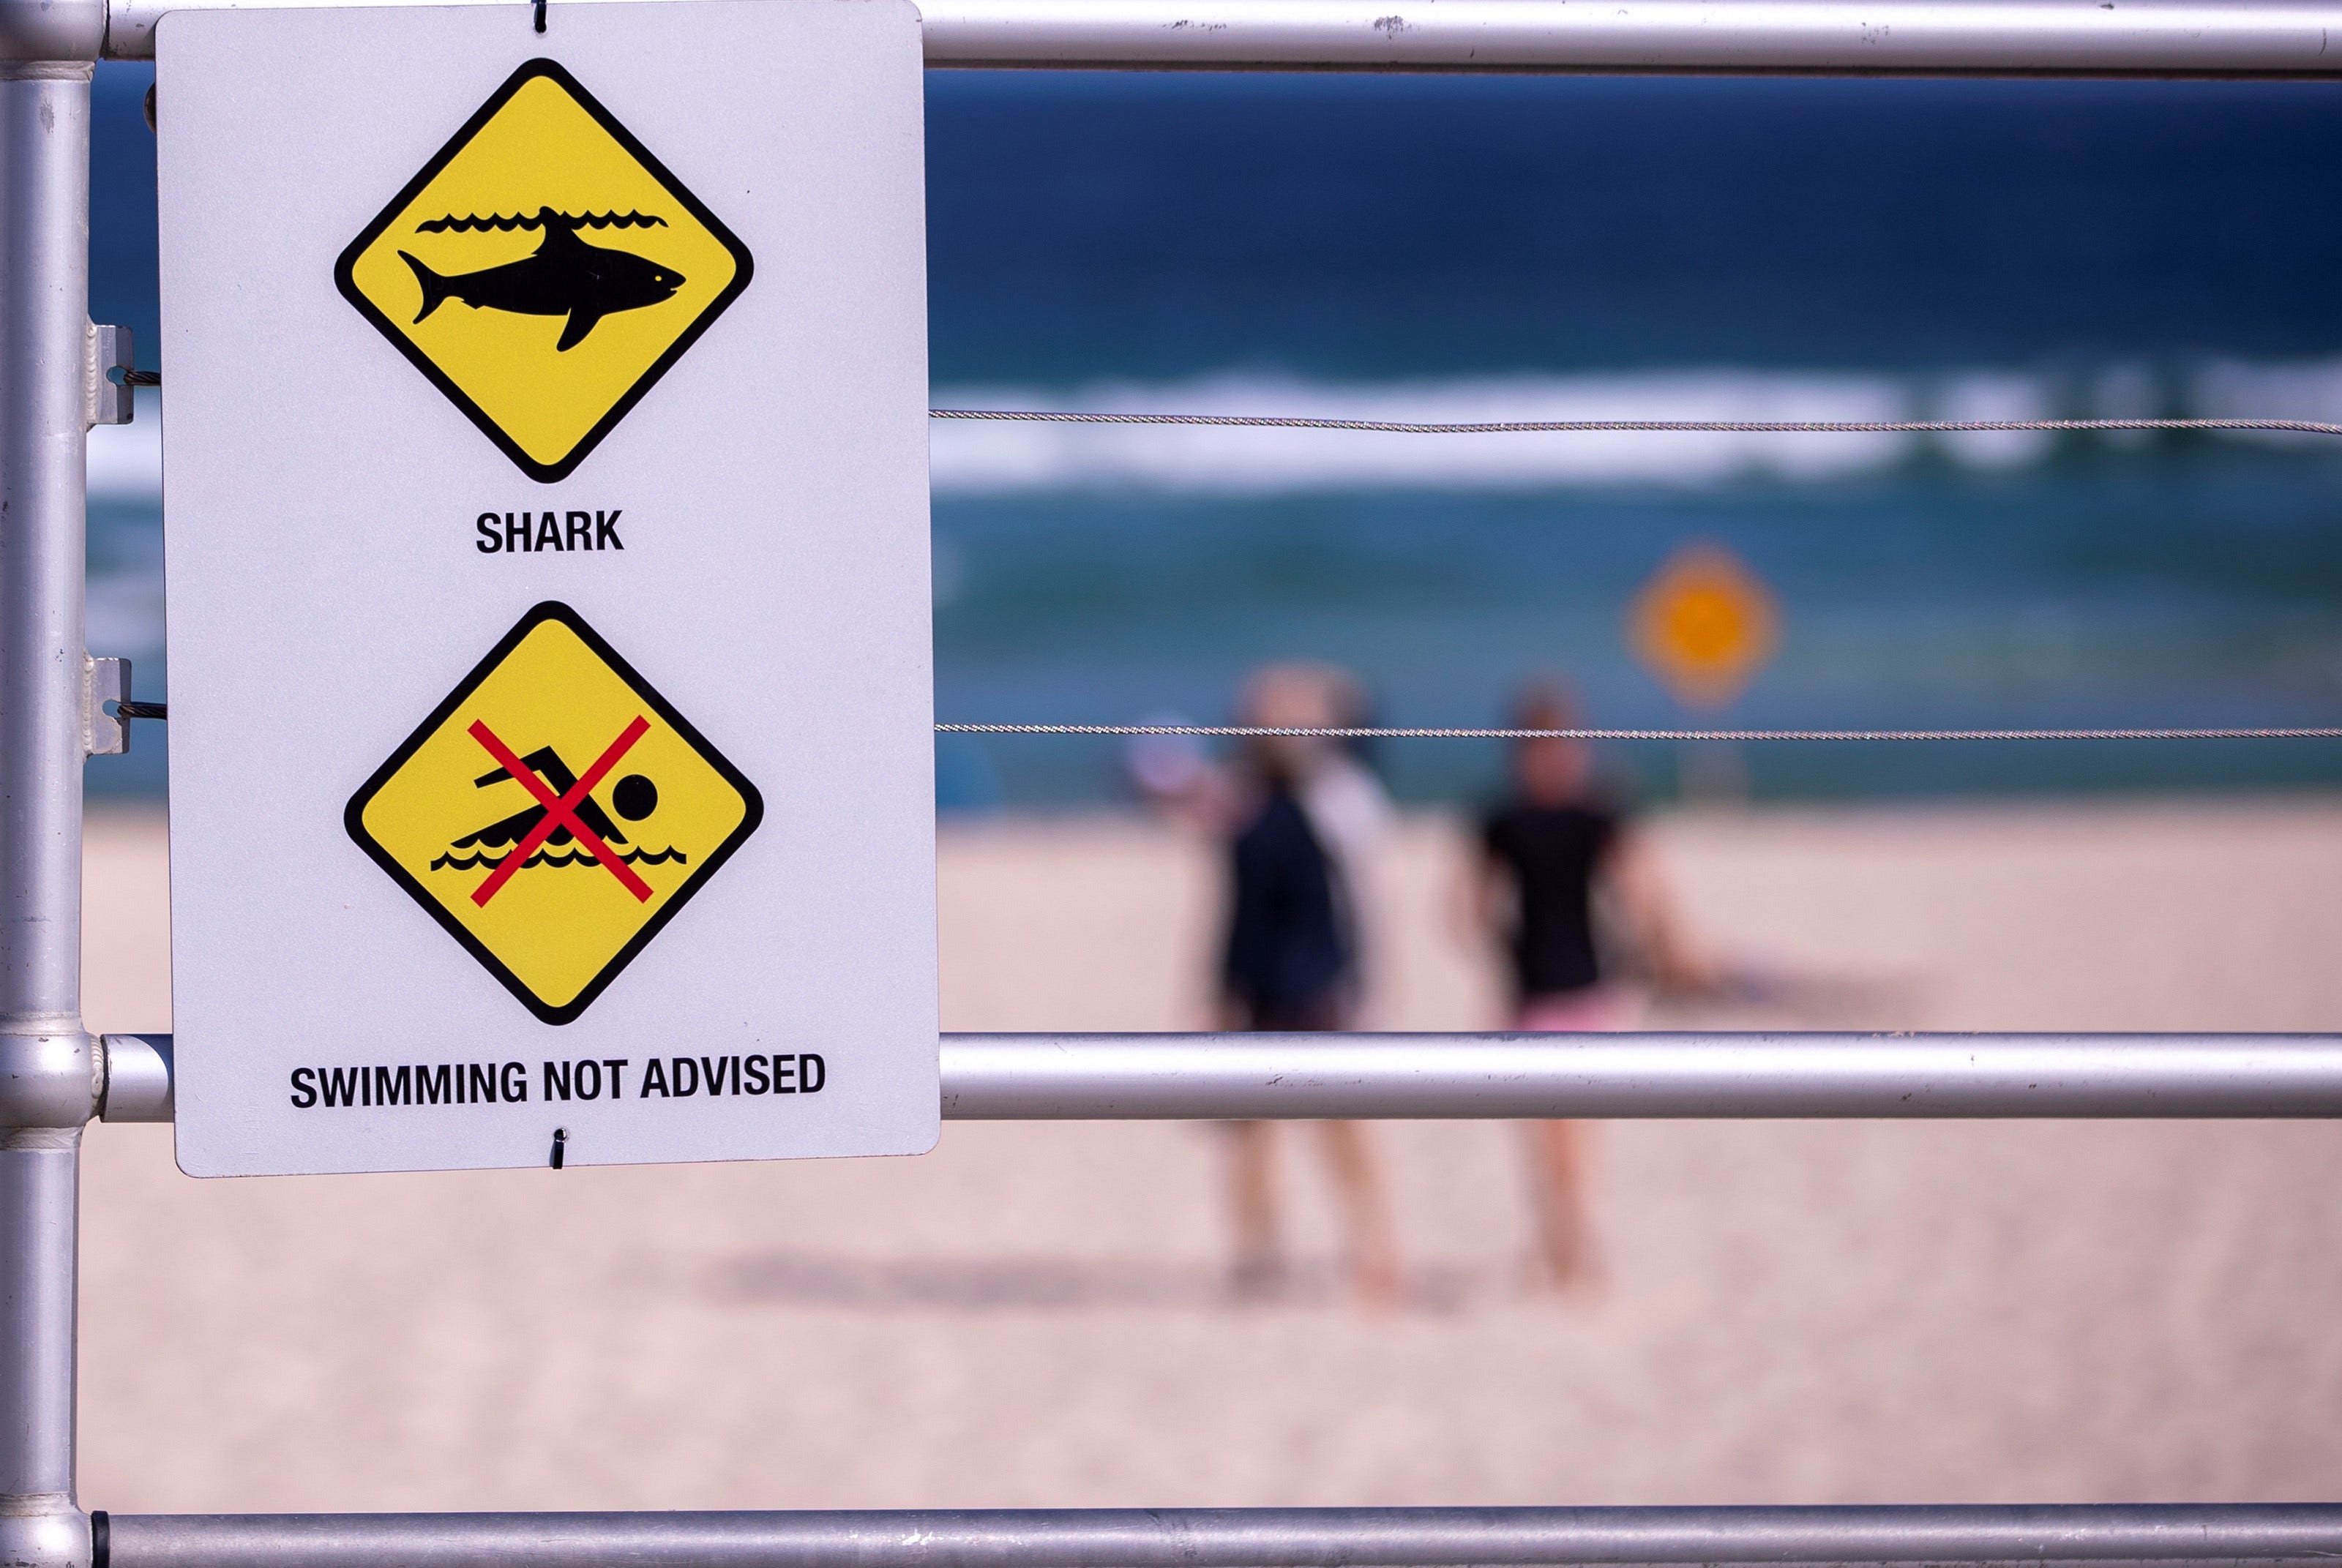 Pieces of wetsuit, surfboard found after shark attack in South Australia